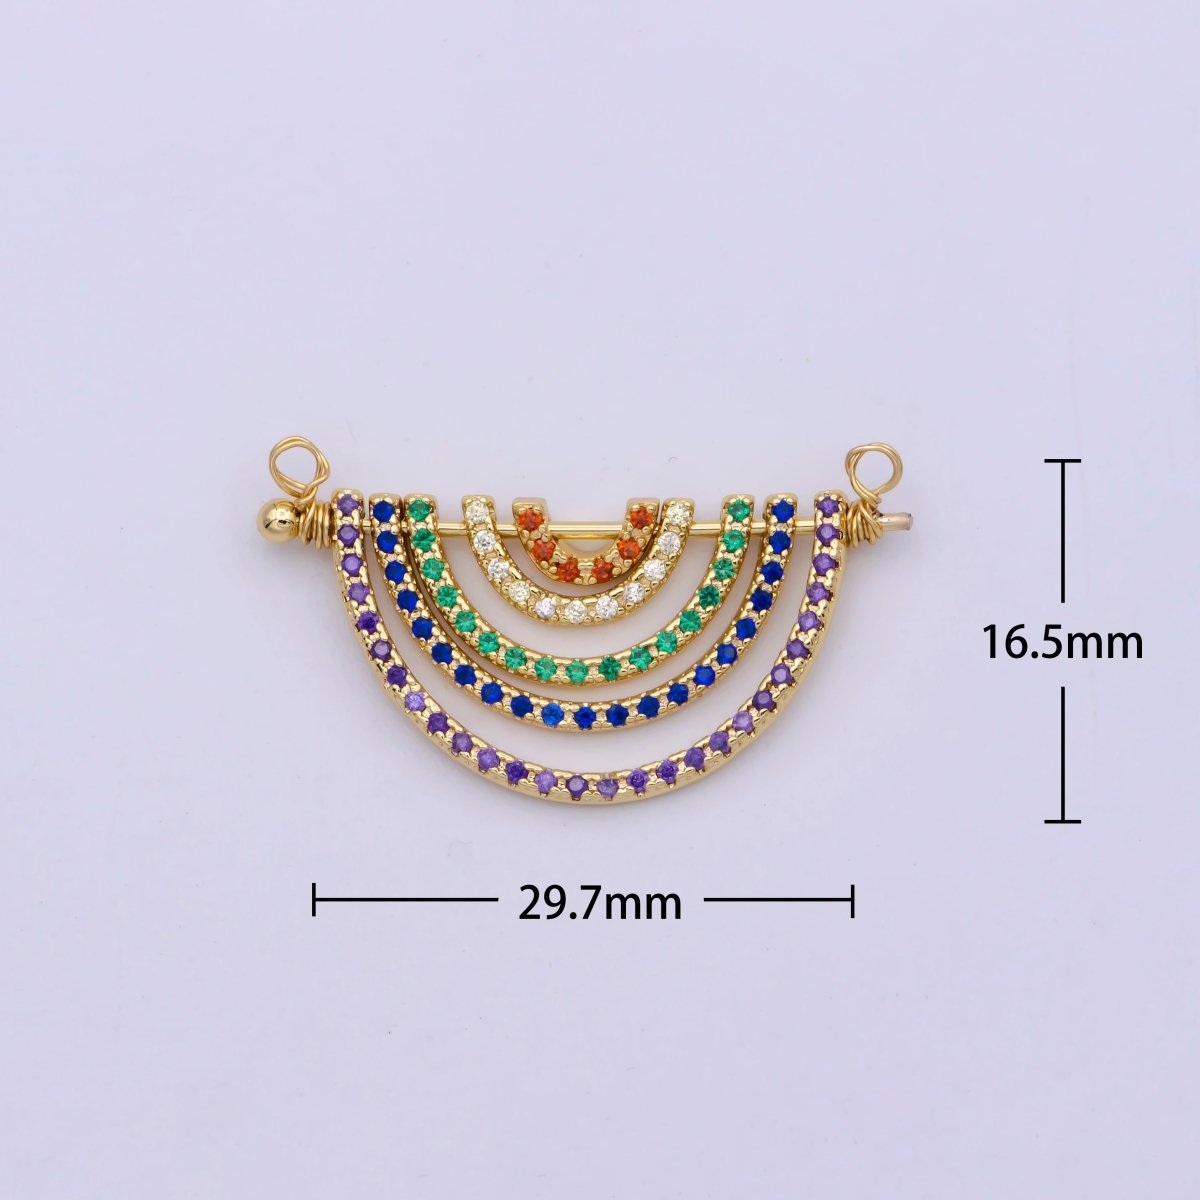 Gold Cz Rainbow Shape Charm for Necklace Pendant Double Bail Dual Loop Charm Connector for Jewelry Making Supply N-065 N-066 - DLUXCA